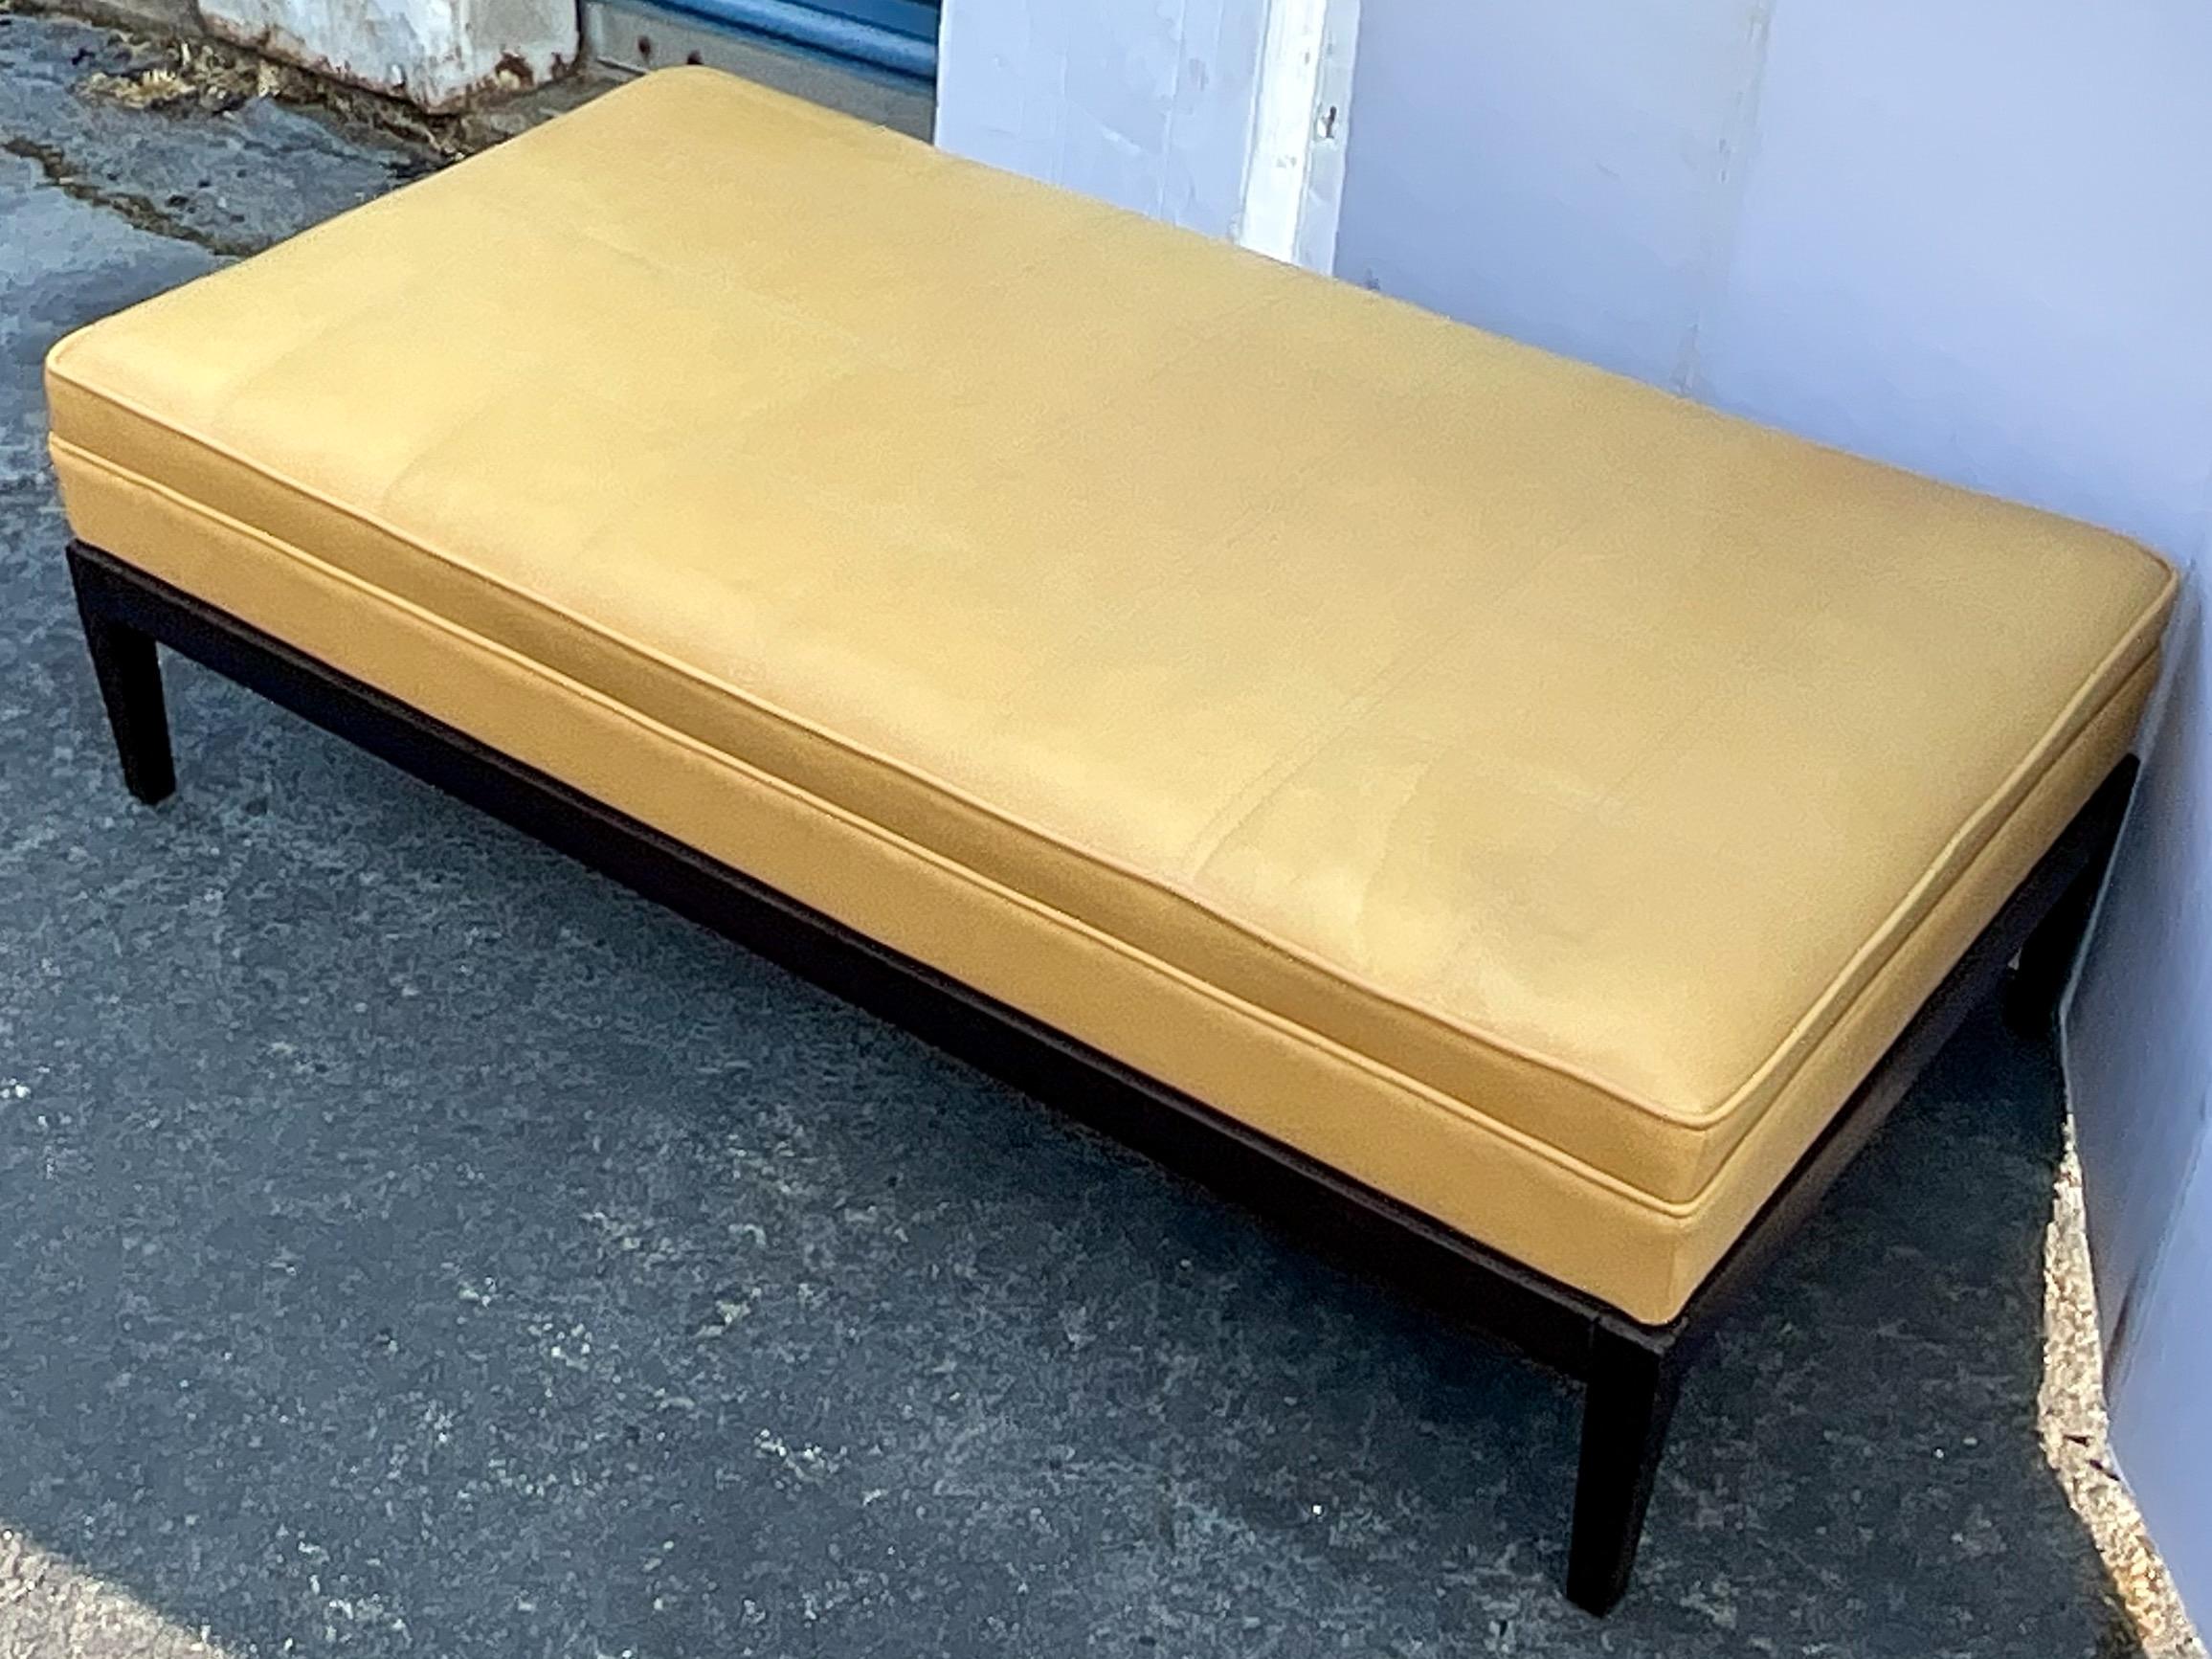 This is a George Smith hand crafted upholstered leather ottoman / coffee table. George Smith was a late 18th century British upholsterer to the royalty of the day. It was known then as it is today for its craftsmanship and quality materials. It is